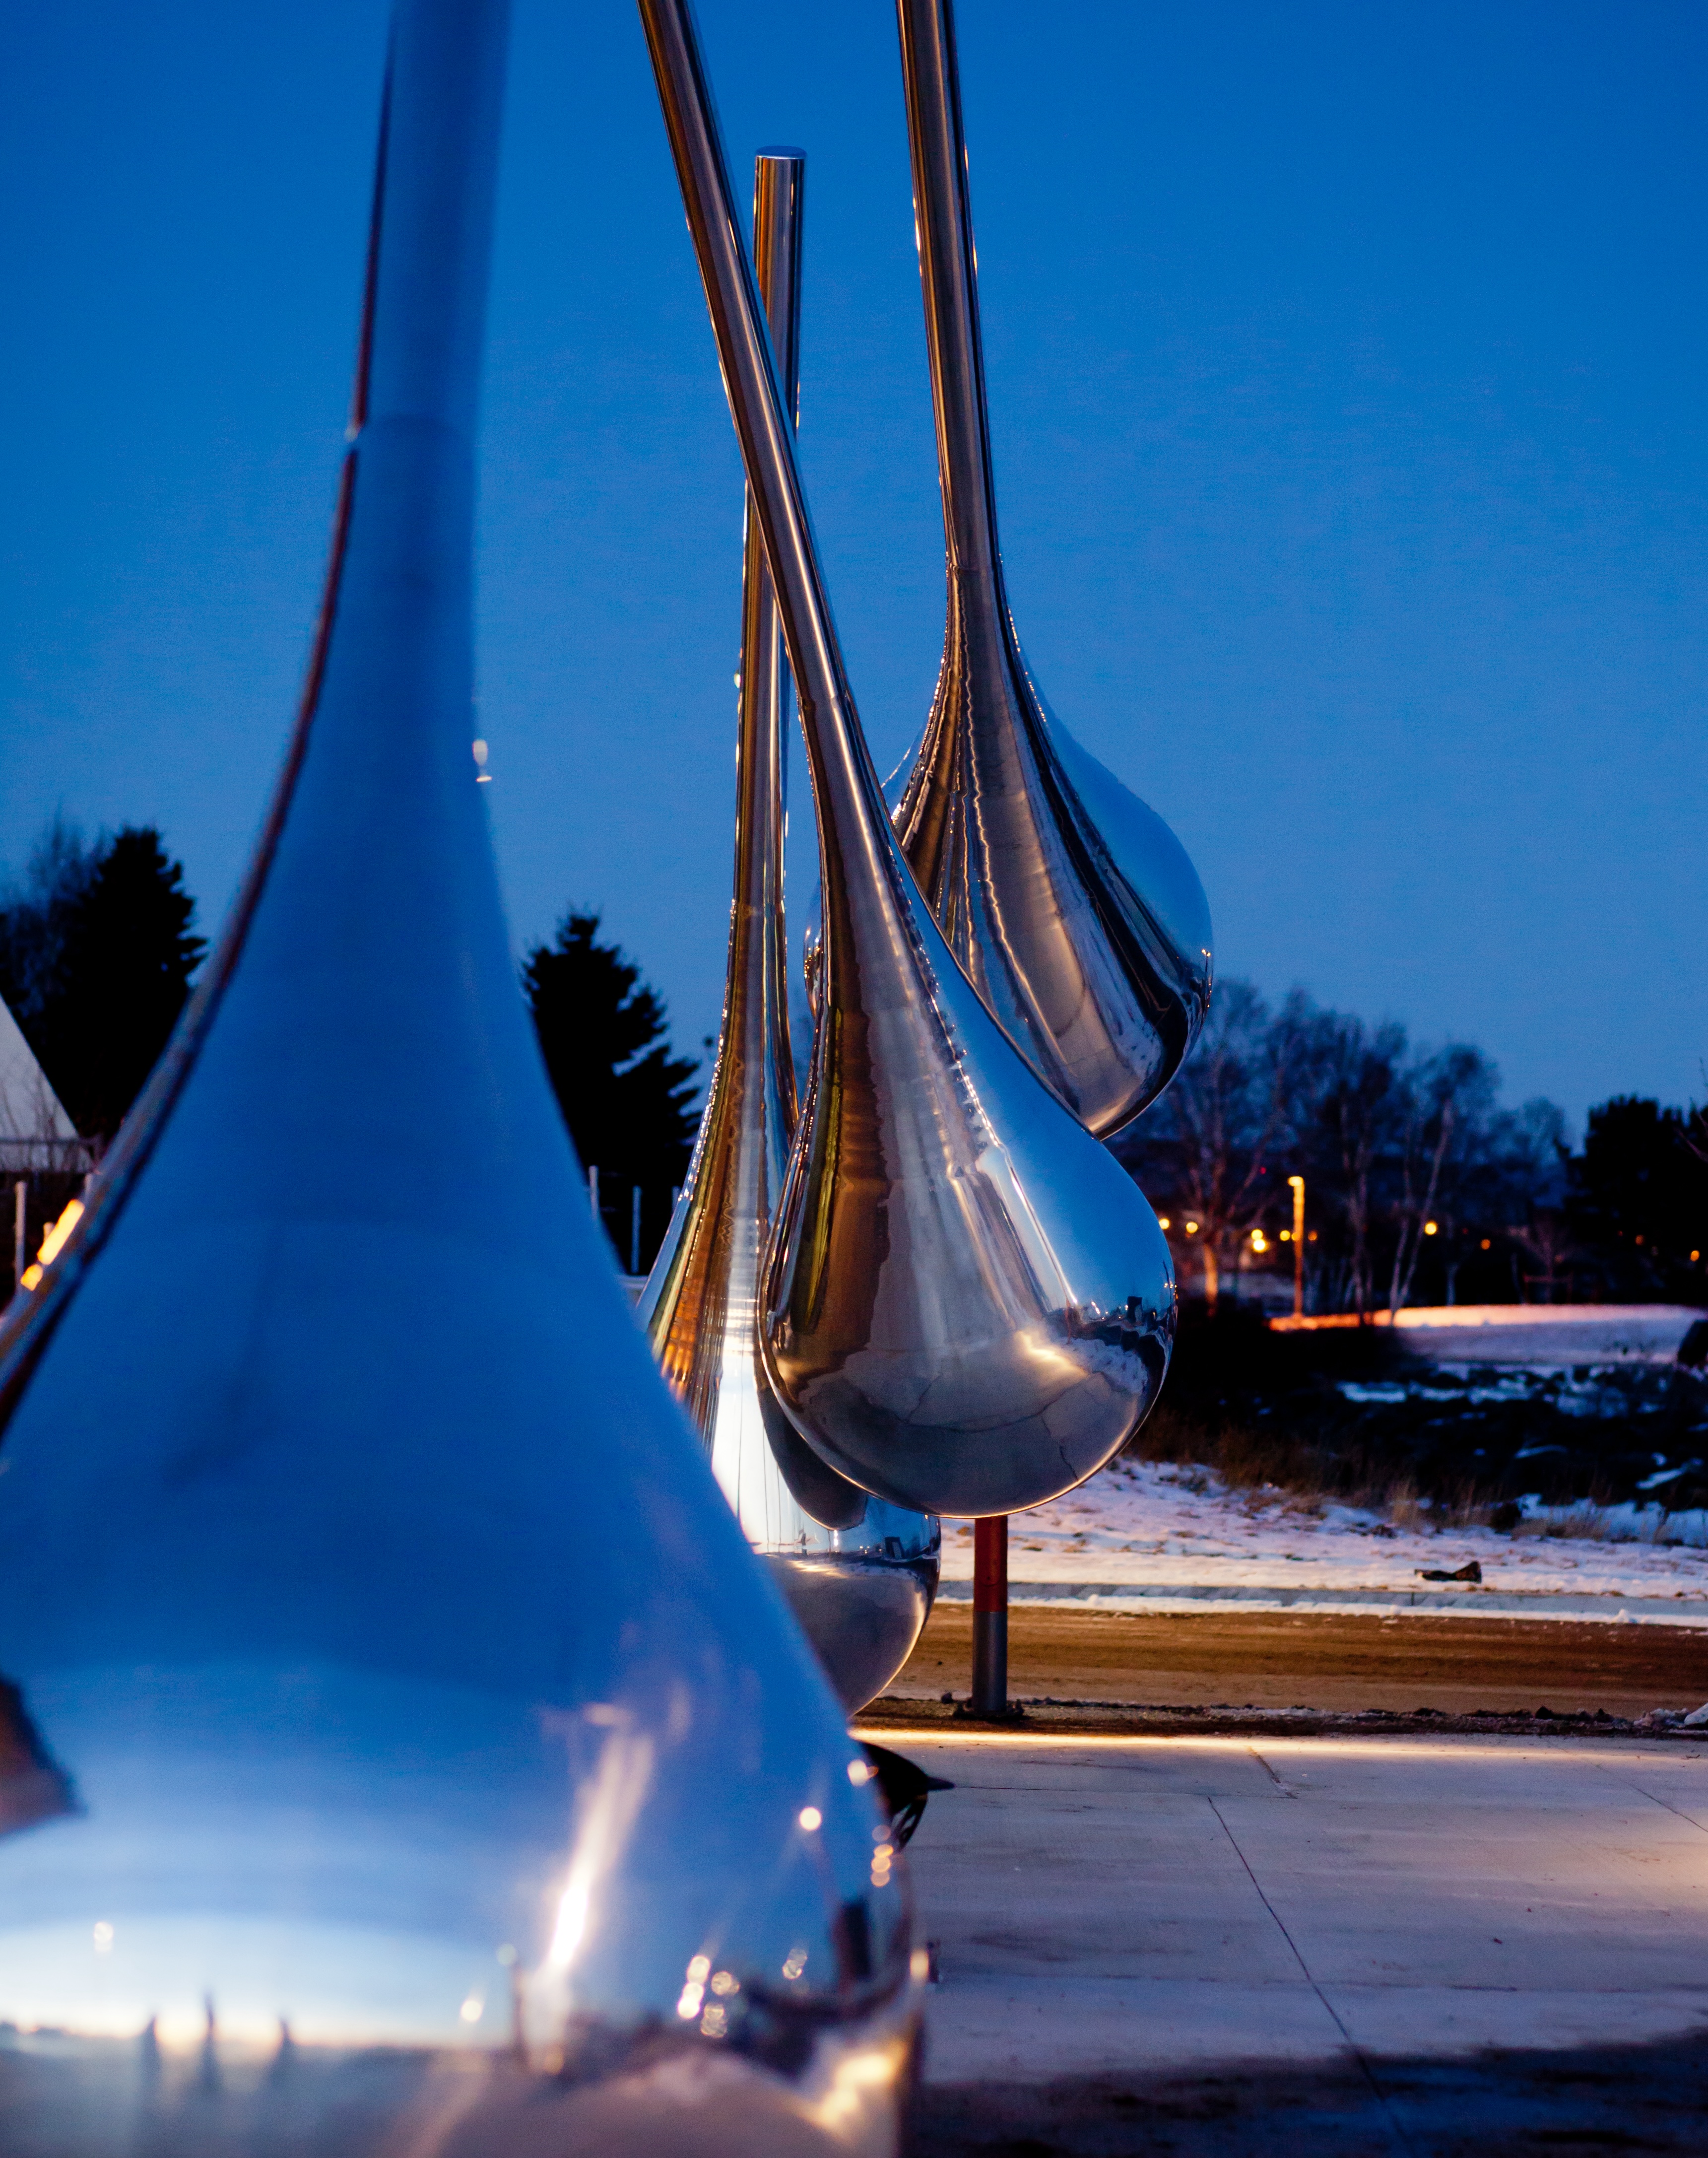 "Traveller's Return", an outdoor sculpture in Thunder Bay; large mirror-like metal water droplets displayed near the waterfront.